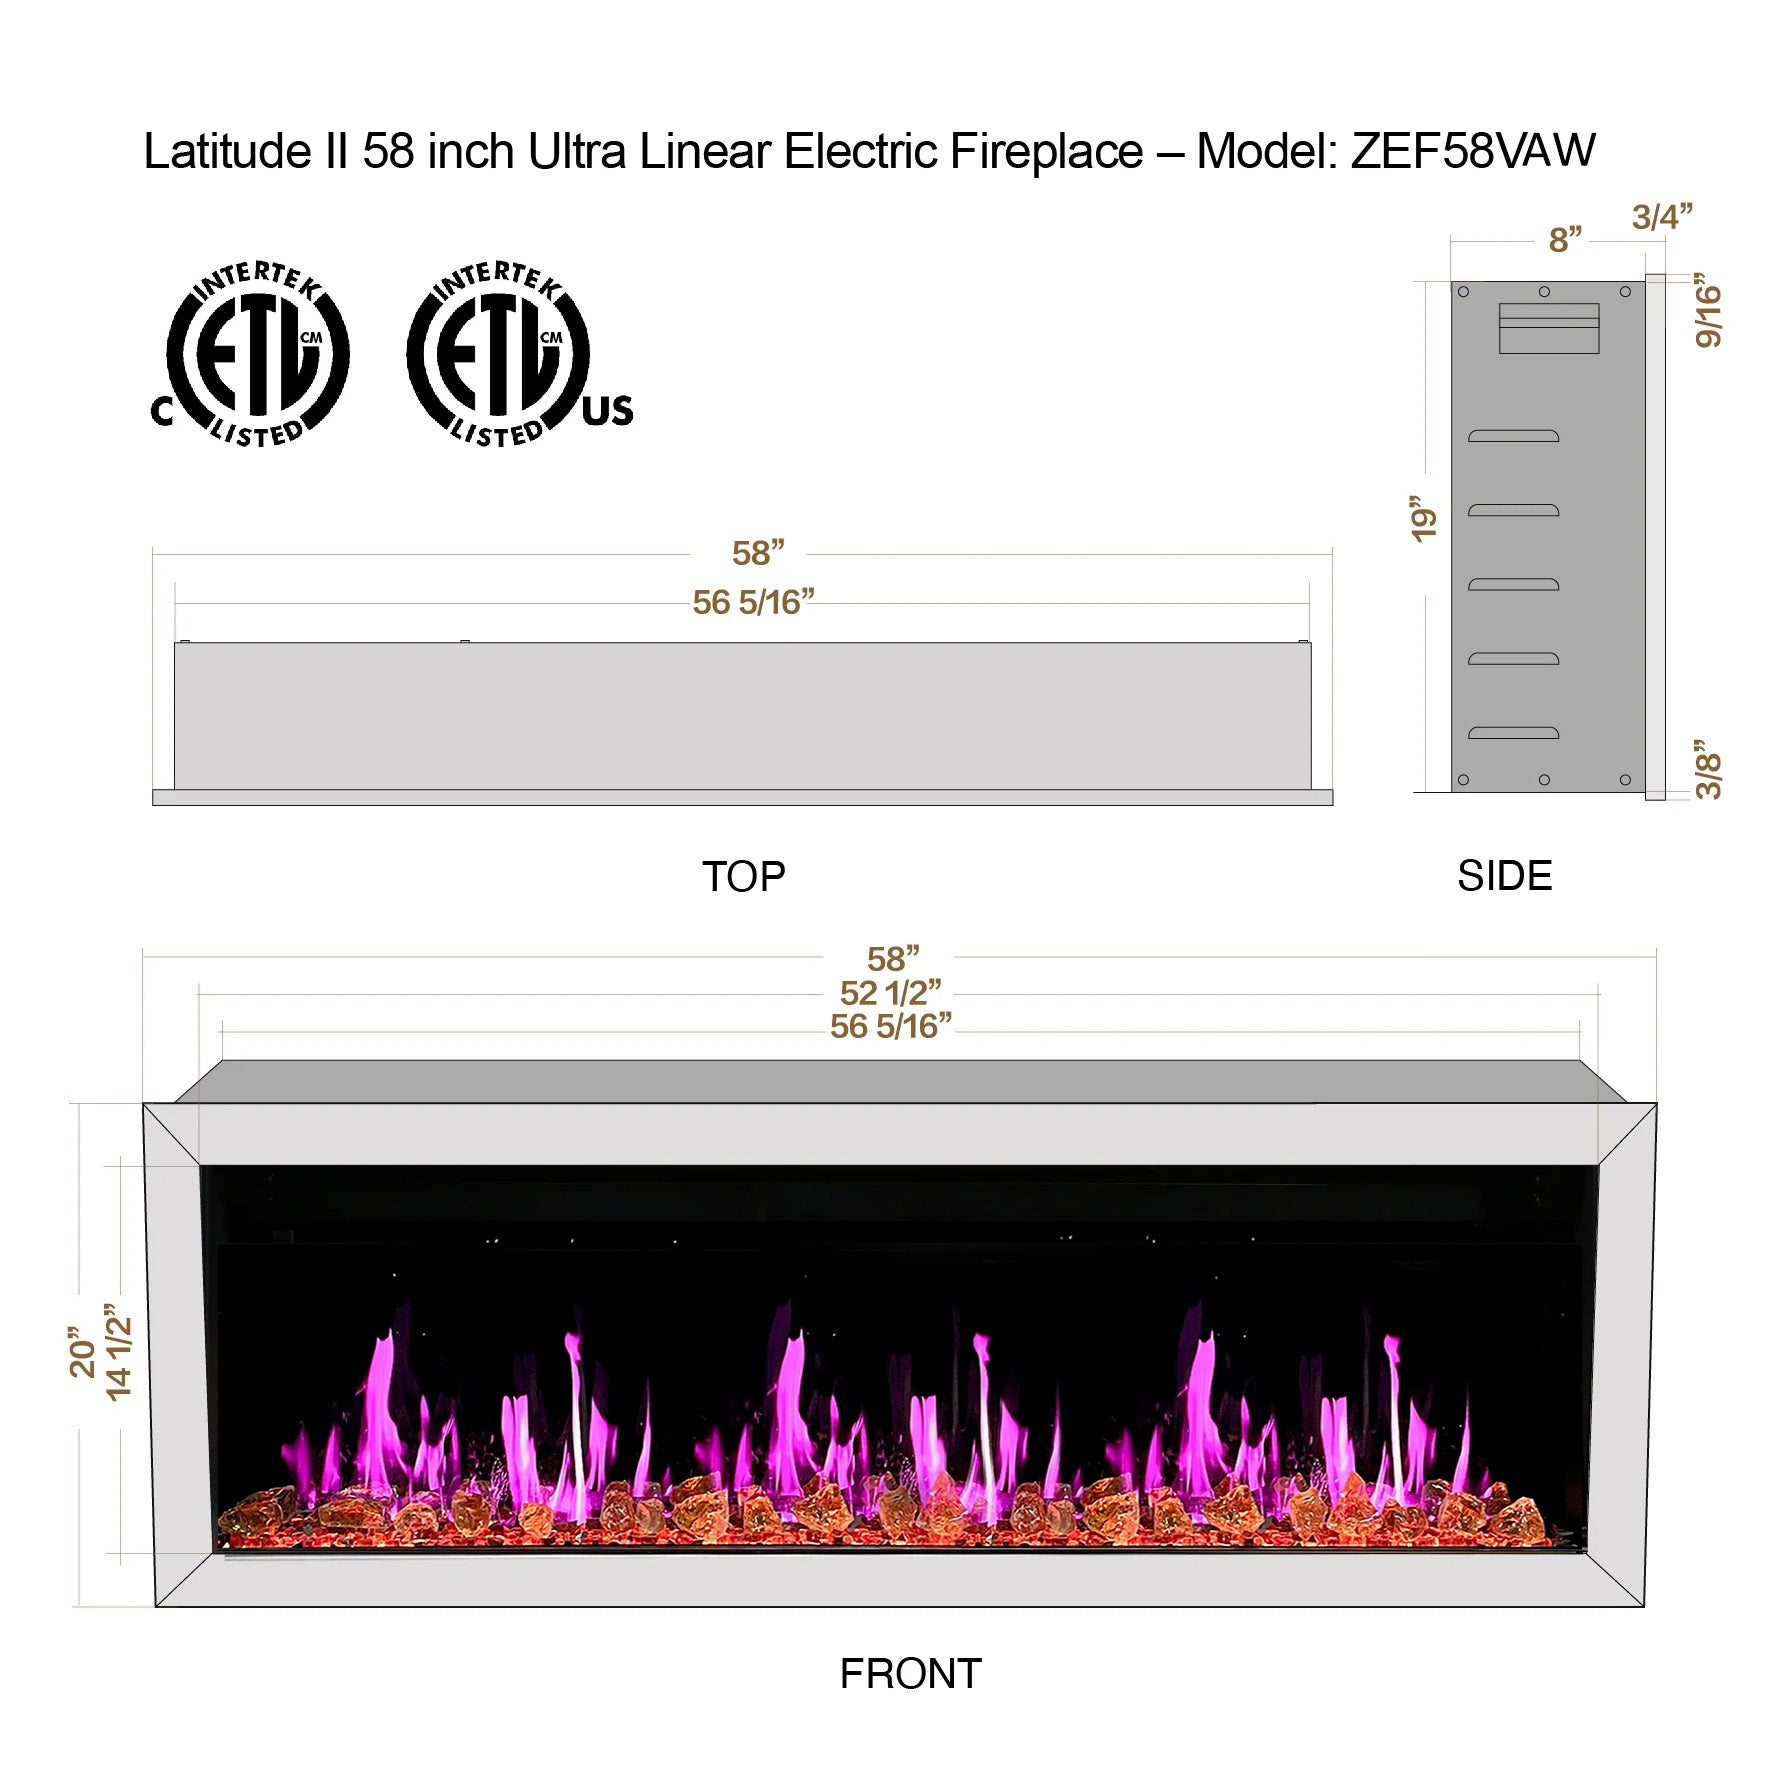 Litdeeer Gloria II 58 Seamless Push-in Electric Fireplace with Reflective Fire Glass_White_-ZEF58VAW-Dimensions